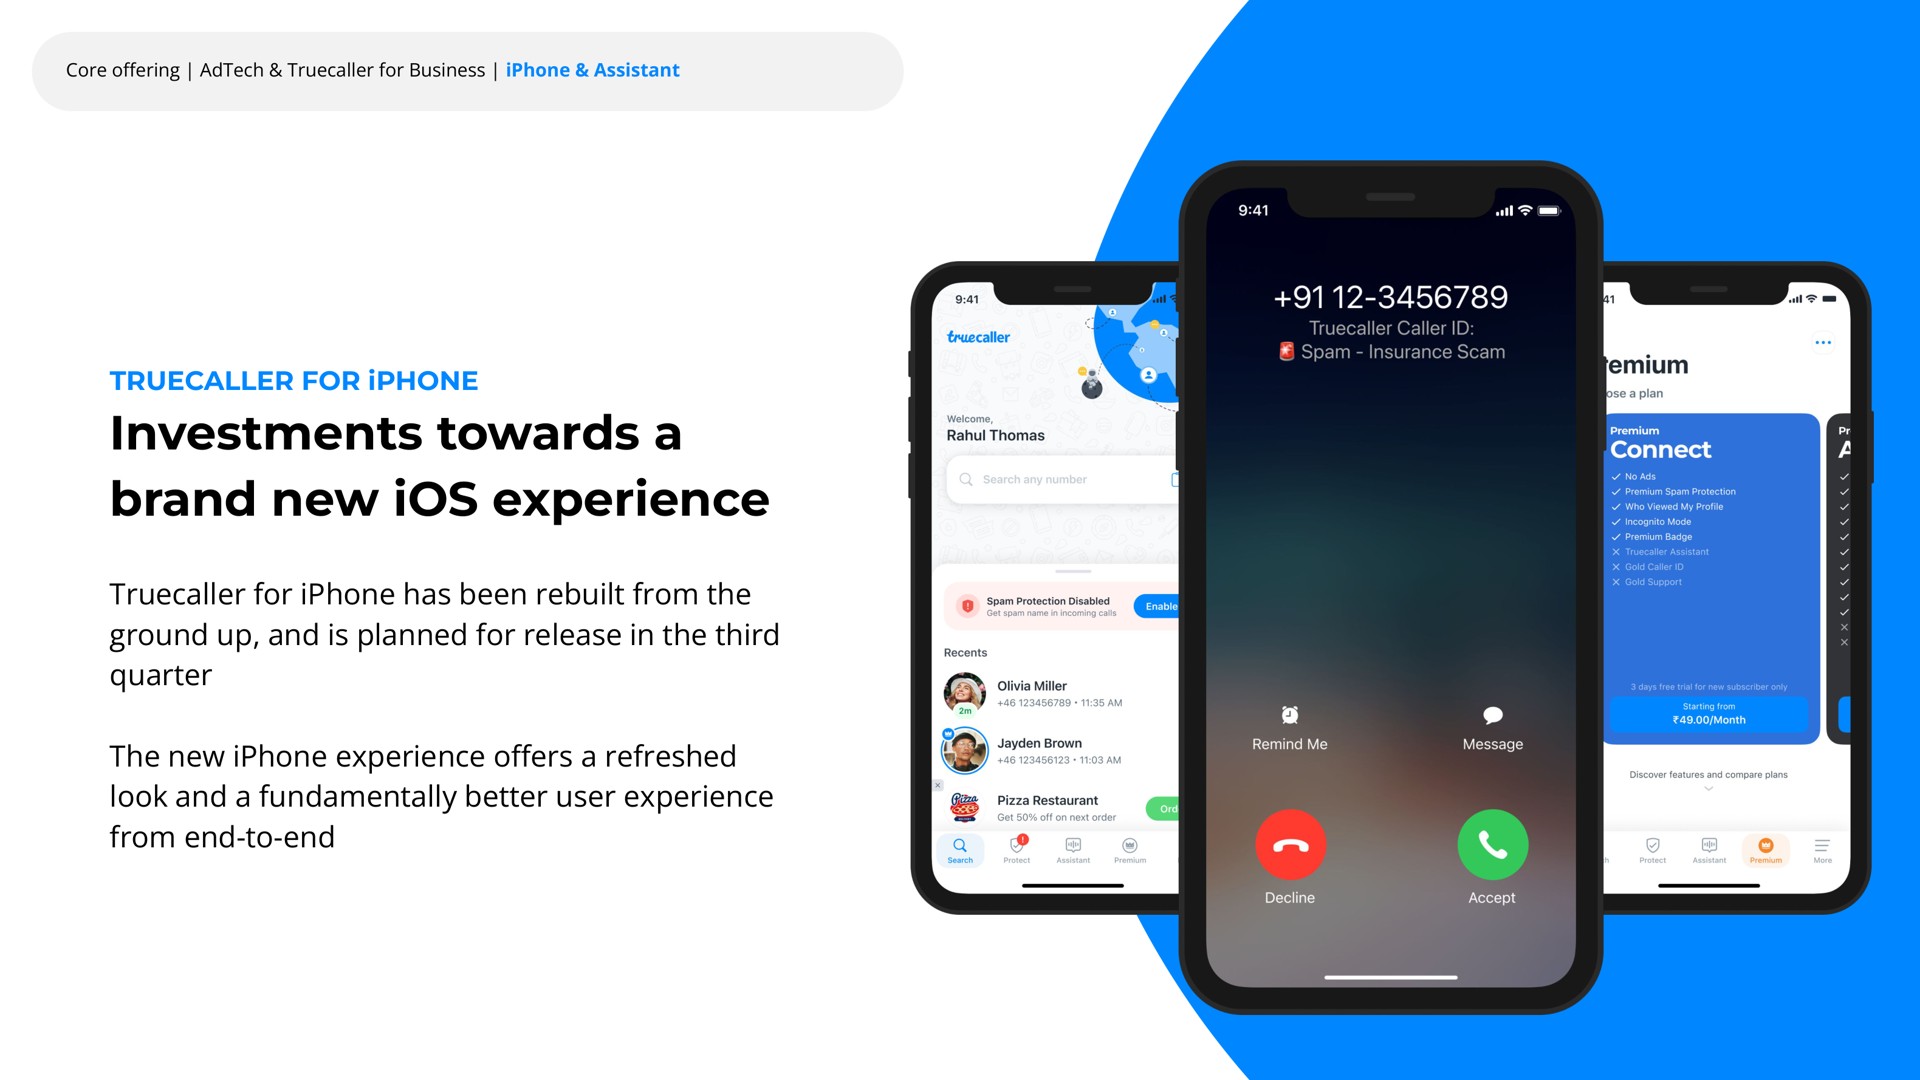 investments towards a brand new ios experience the offers refreshed from end to end sao am sha | Truecaller